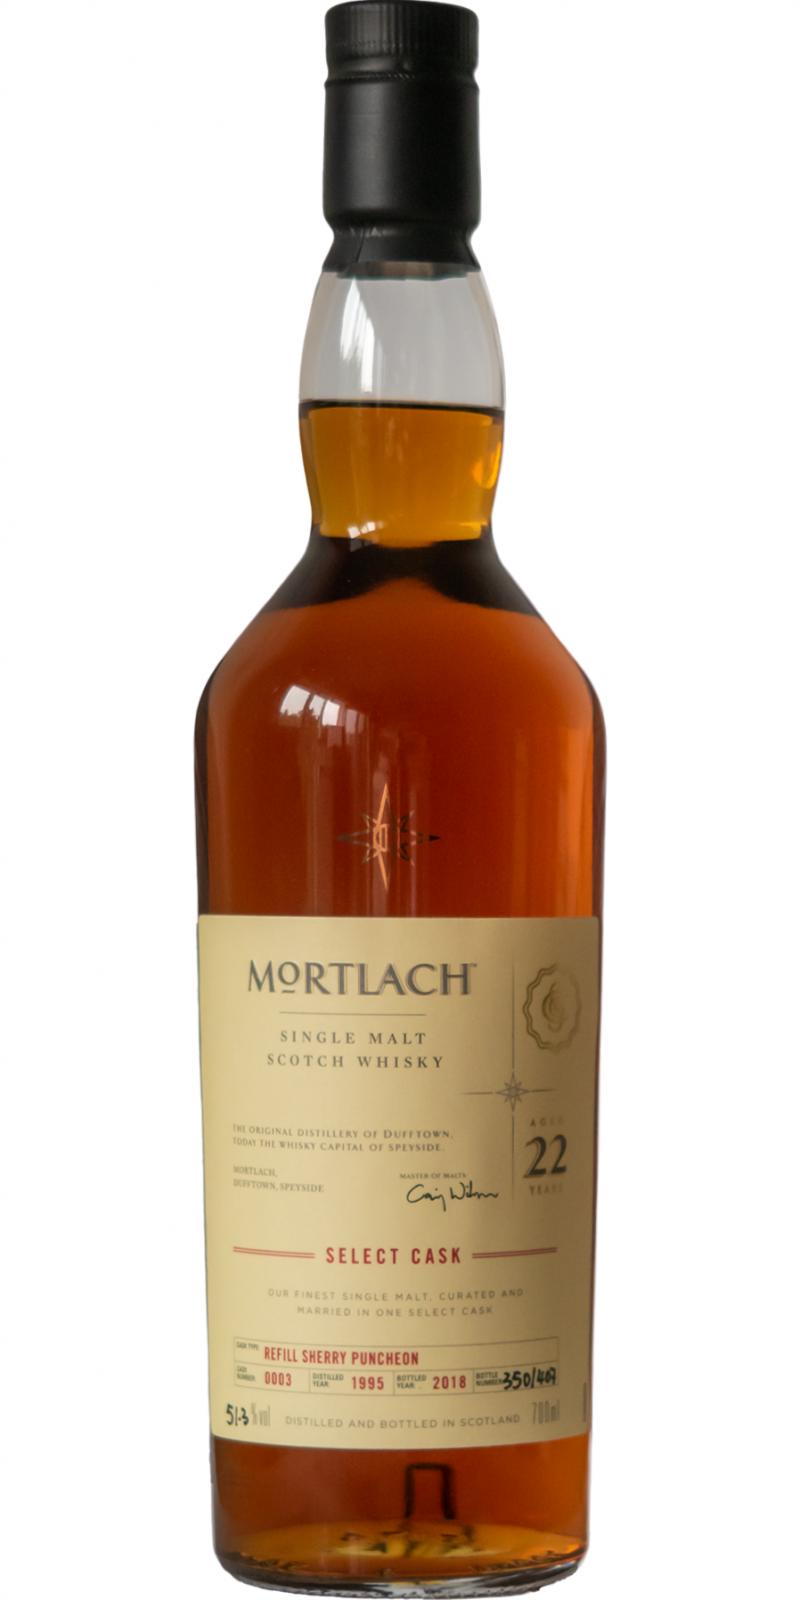 Mortlach 1995 Select Cask Refill Sherry Puncheon #0003 51.3% 700ml